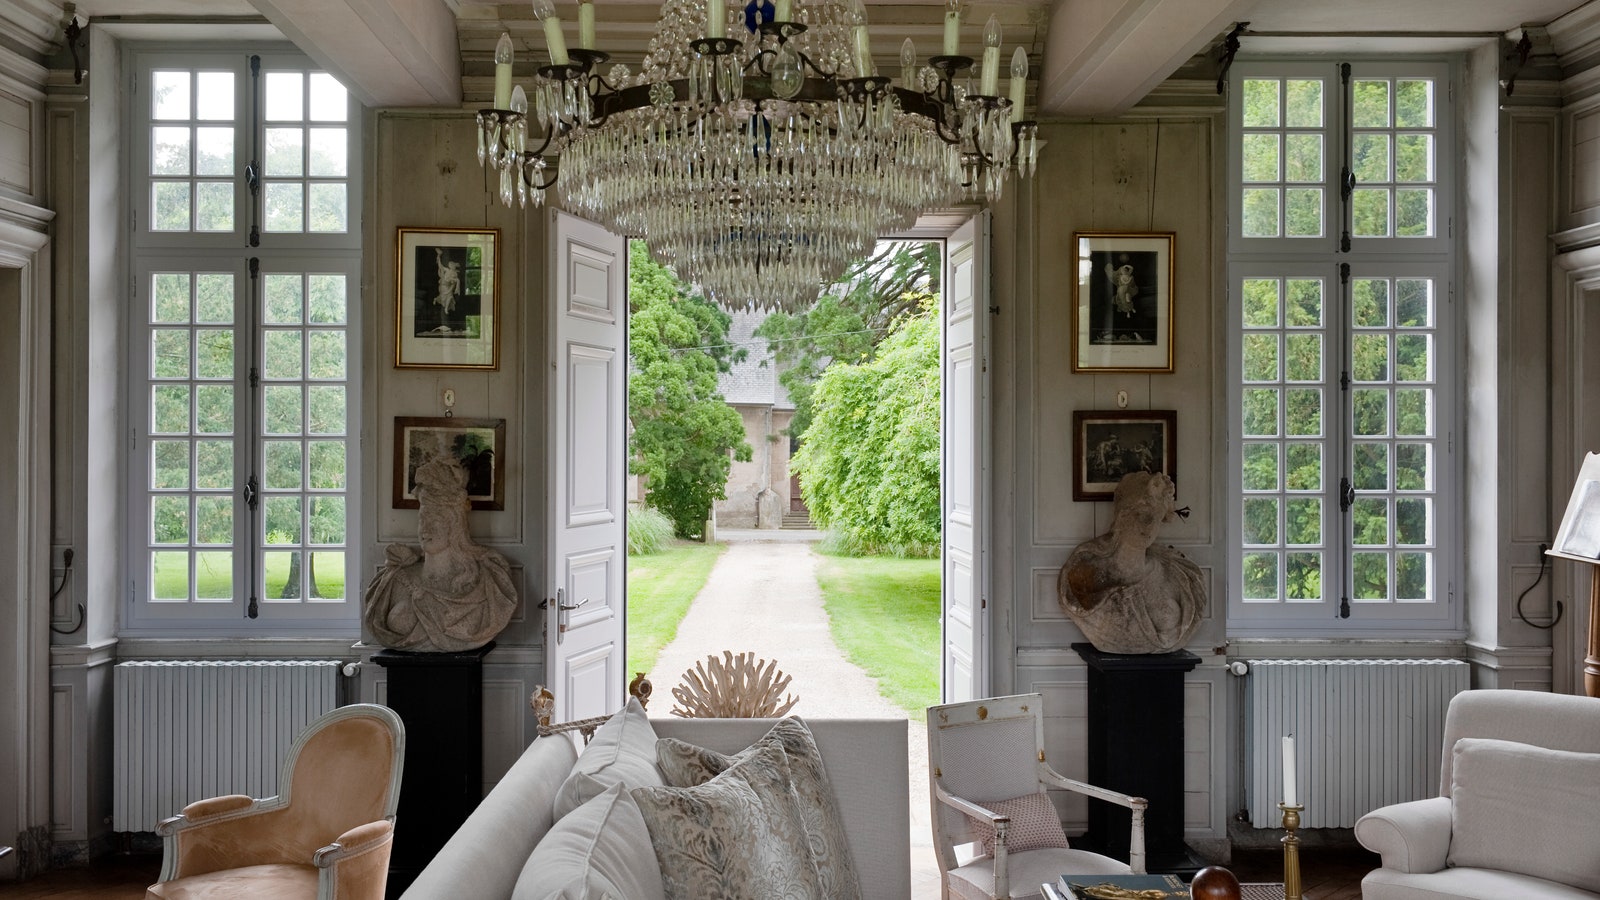 18C chandelier in sitting room furnished with french antiques stone busts and with french doors leading out to the garden